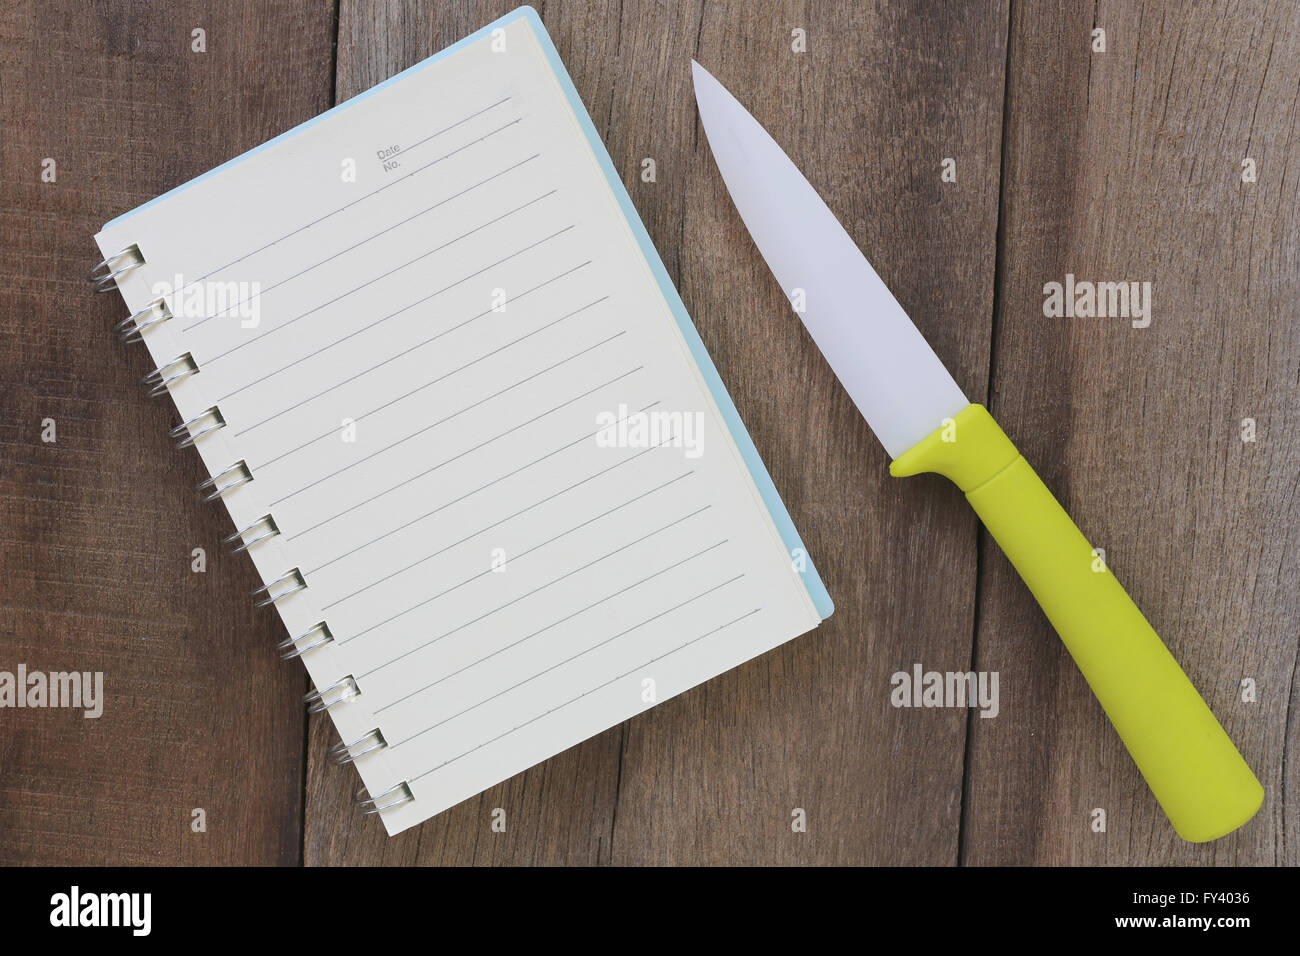 Notebook and acrylic knife placed on the old wooden floor,design concept for knife does not rust. Stock Photo